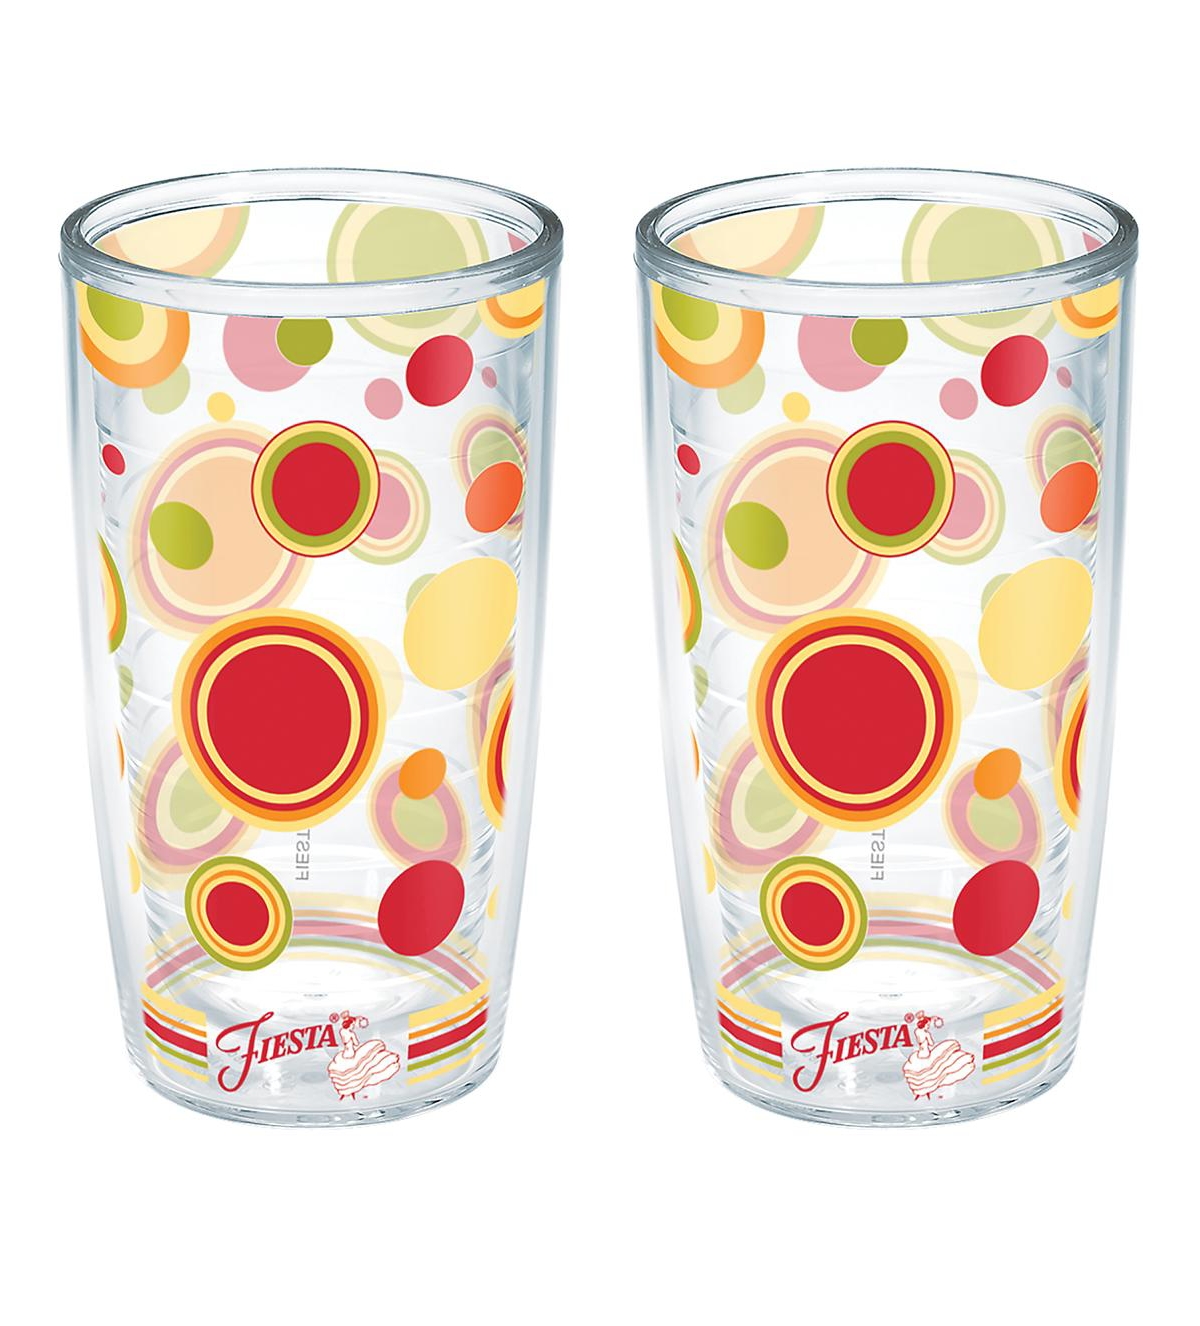 Tervis Tumbler Tervis Fiesta Sunny Dots Made In Usa Double Walled Insulated Tumbler Cup Keeps Drinks Cold & Hot, 16 In Open Miscellaneous